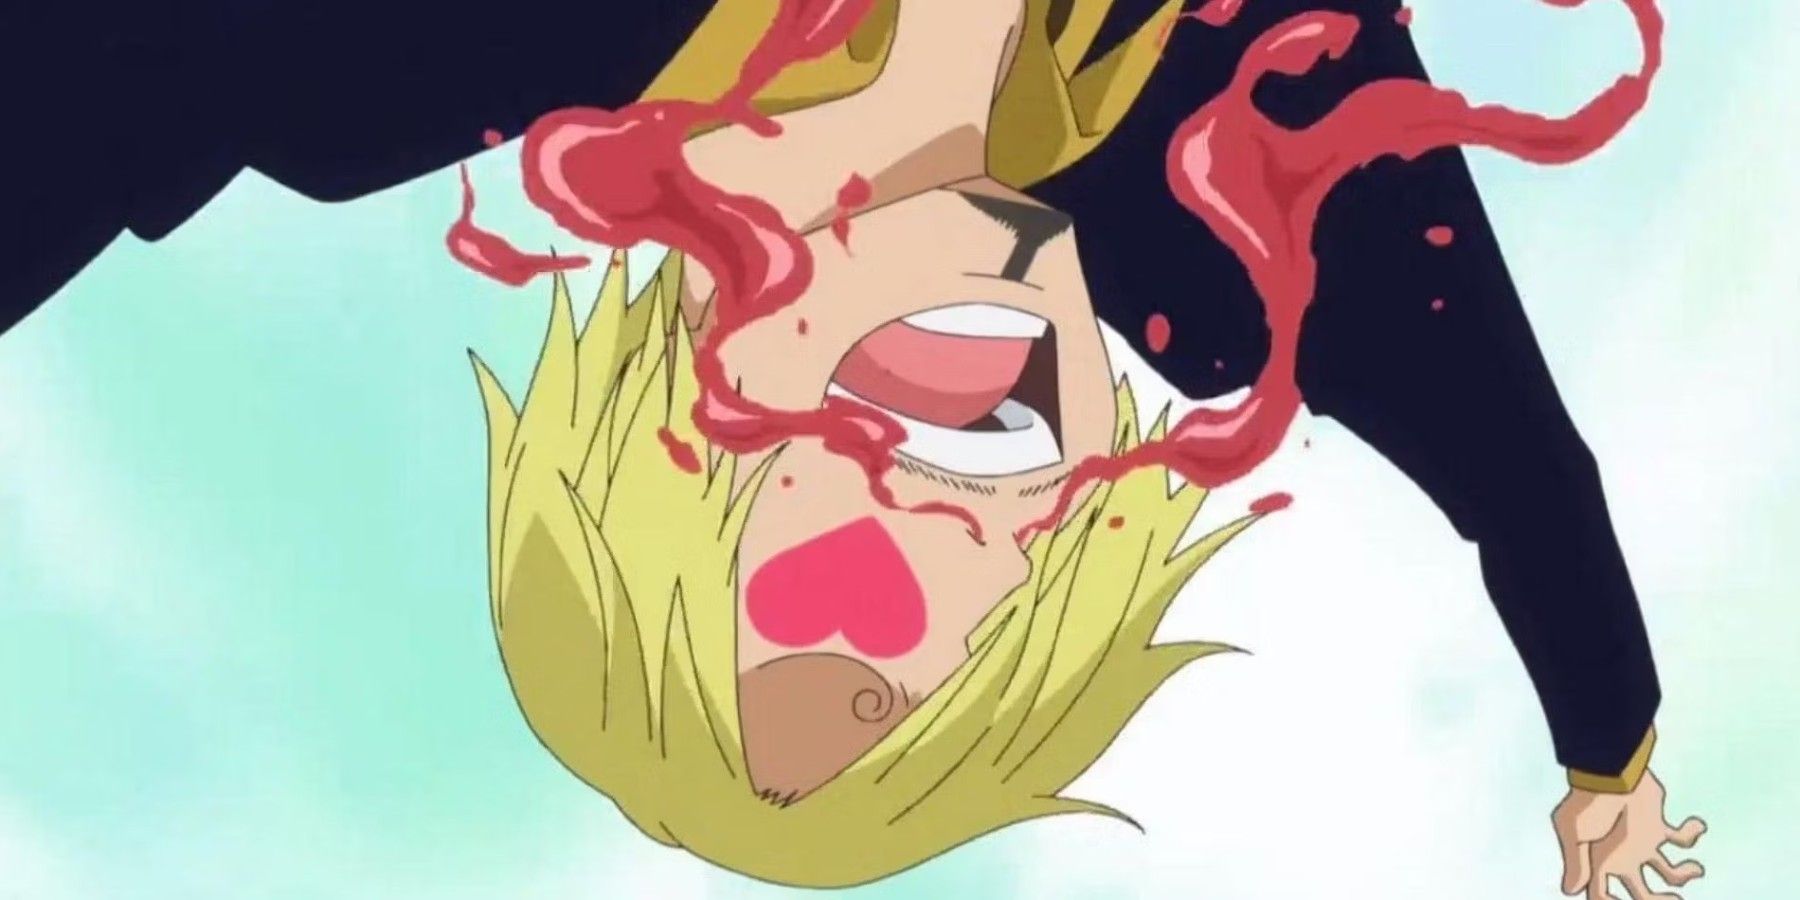 Sanji bleeding from his nosee